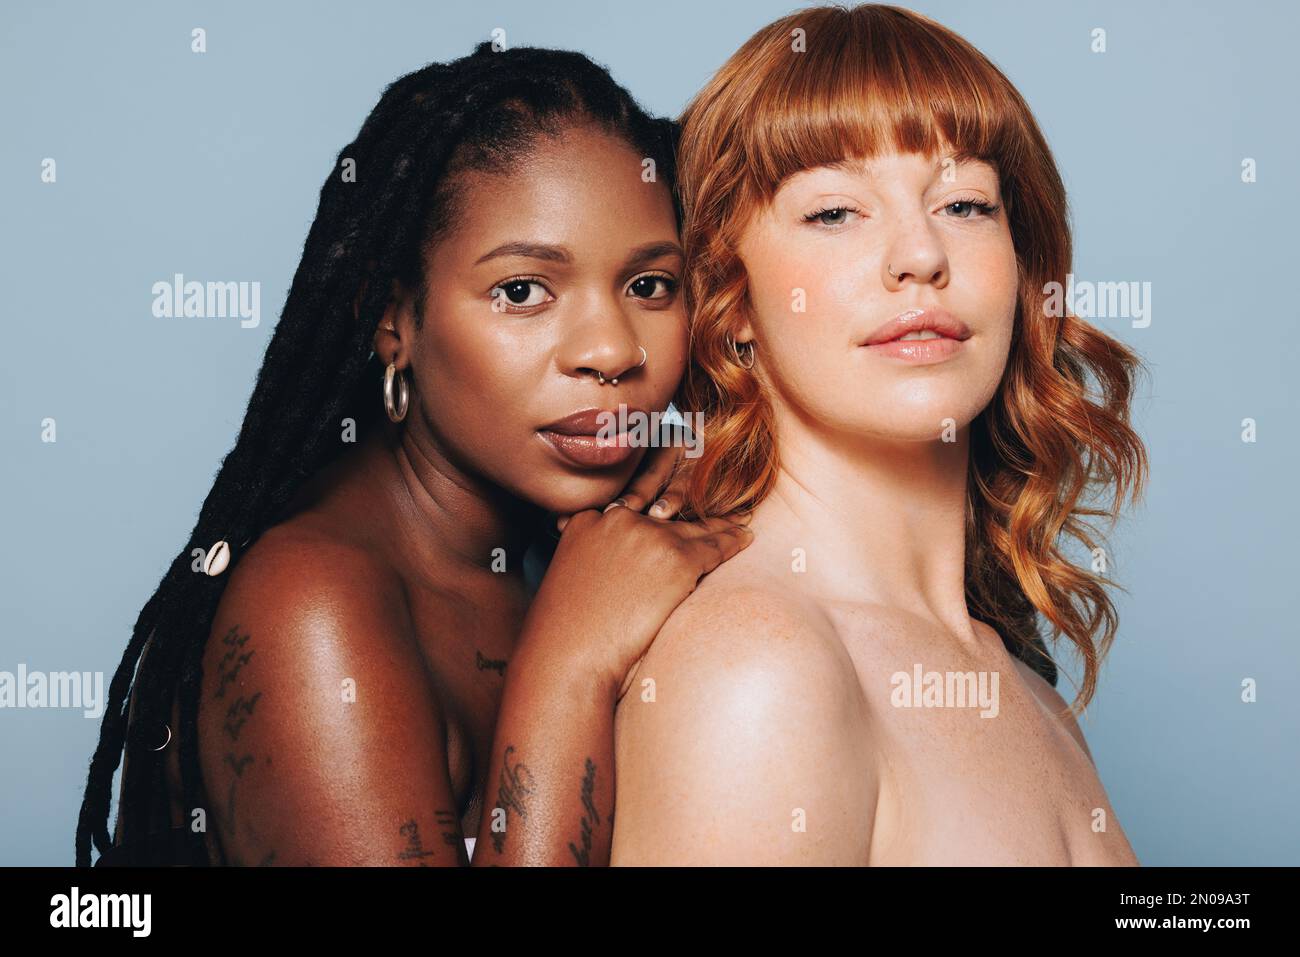 Two women with different skin tones looking at the camera while standing together. Body confident young women feeling comfortable in their own skin. D Stock Photo